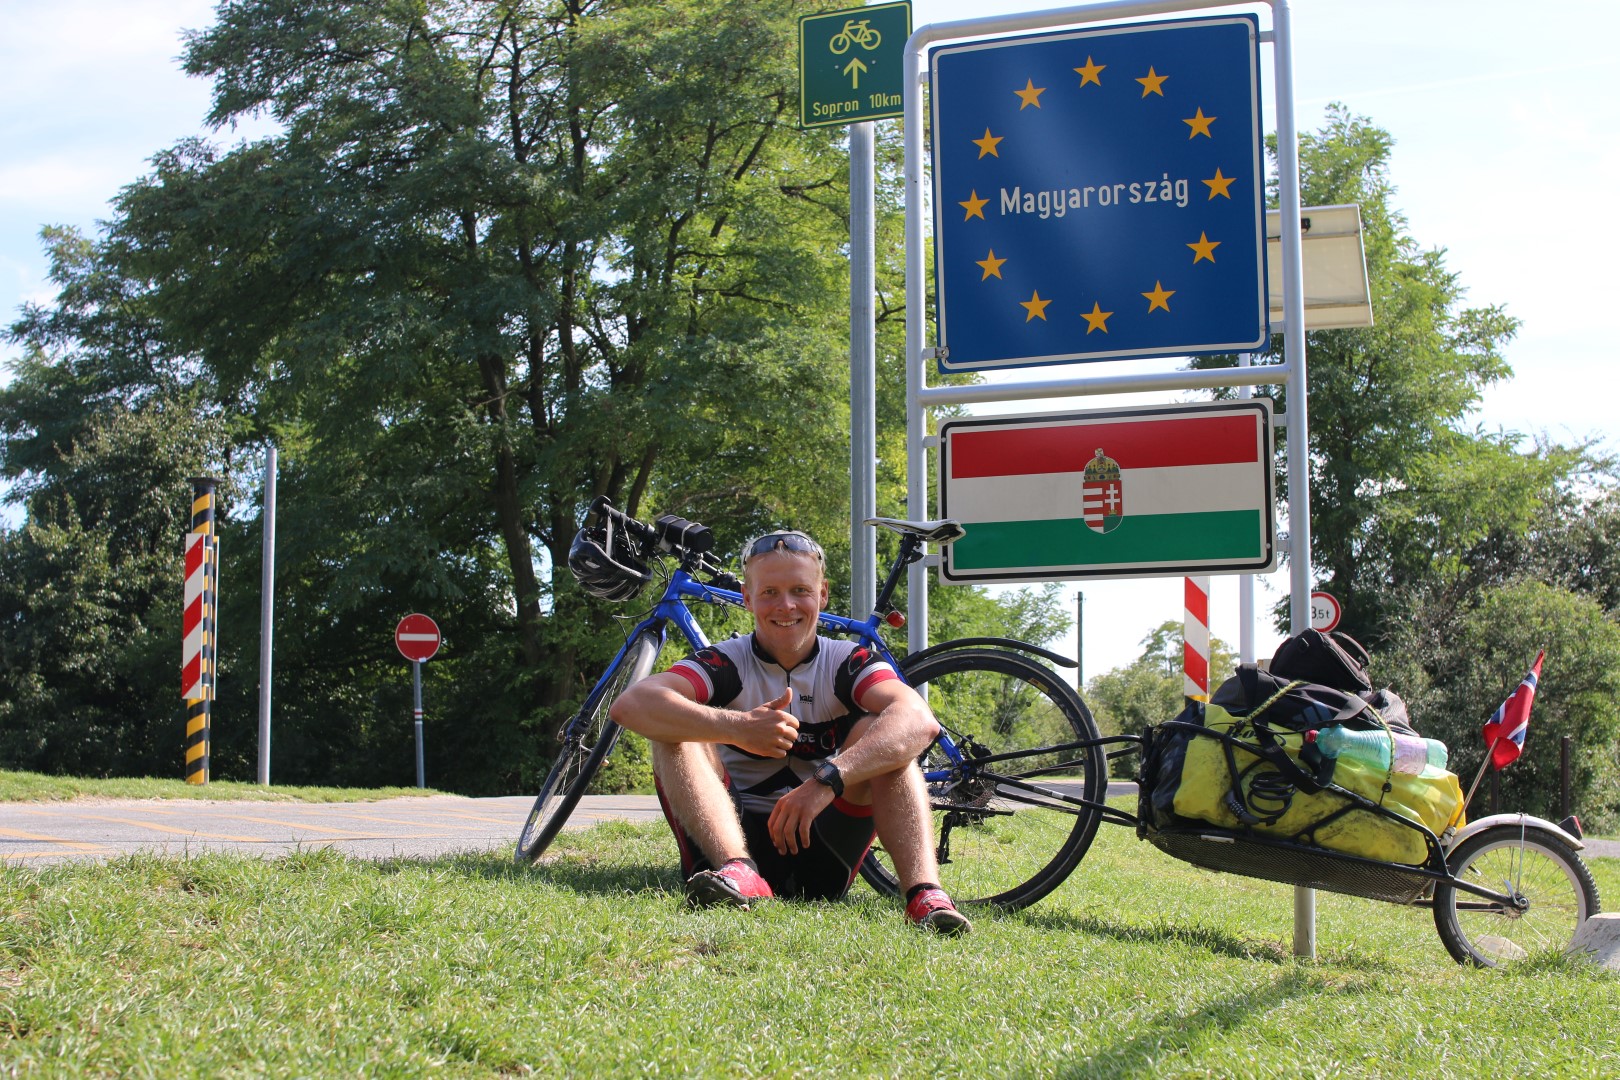 Crossing the boarder between Austria and Hungary 5 times on my way to Koszeg